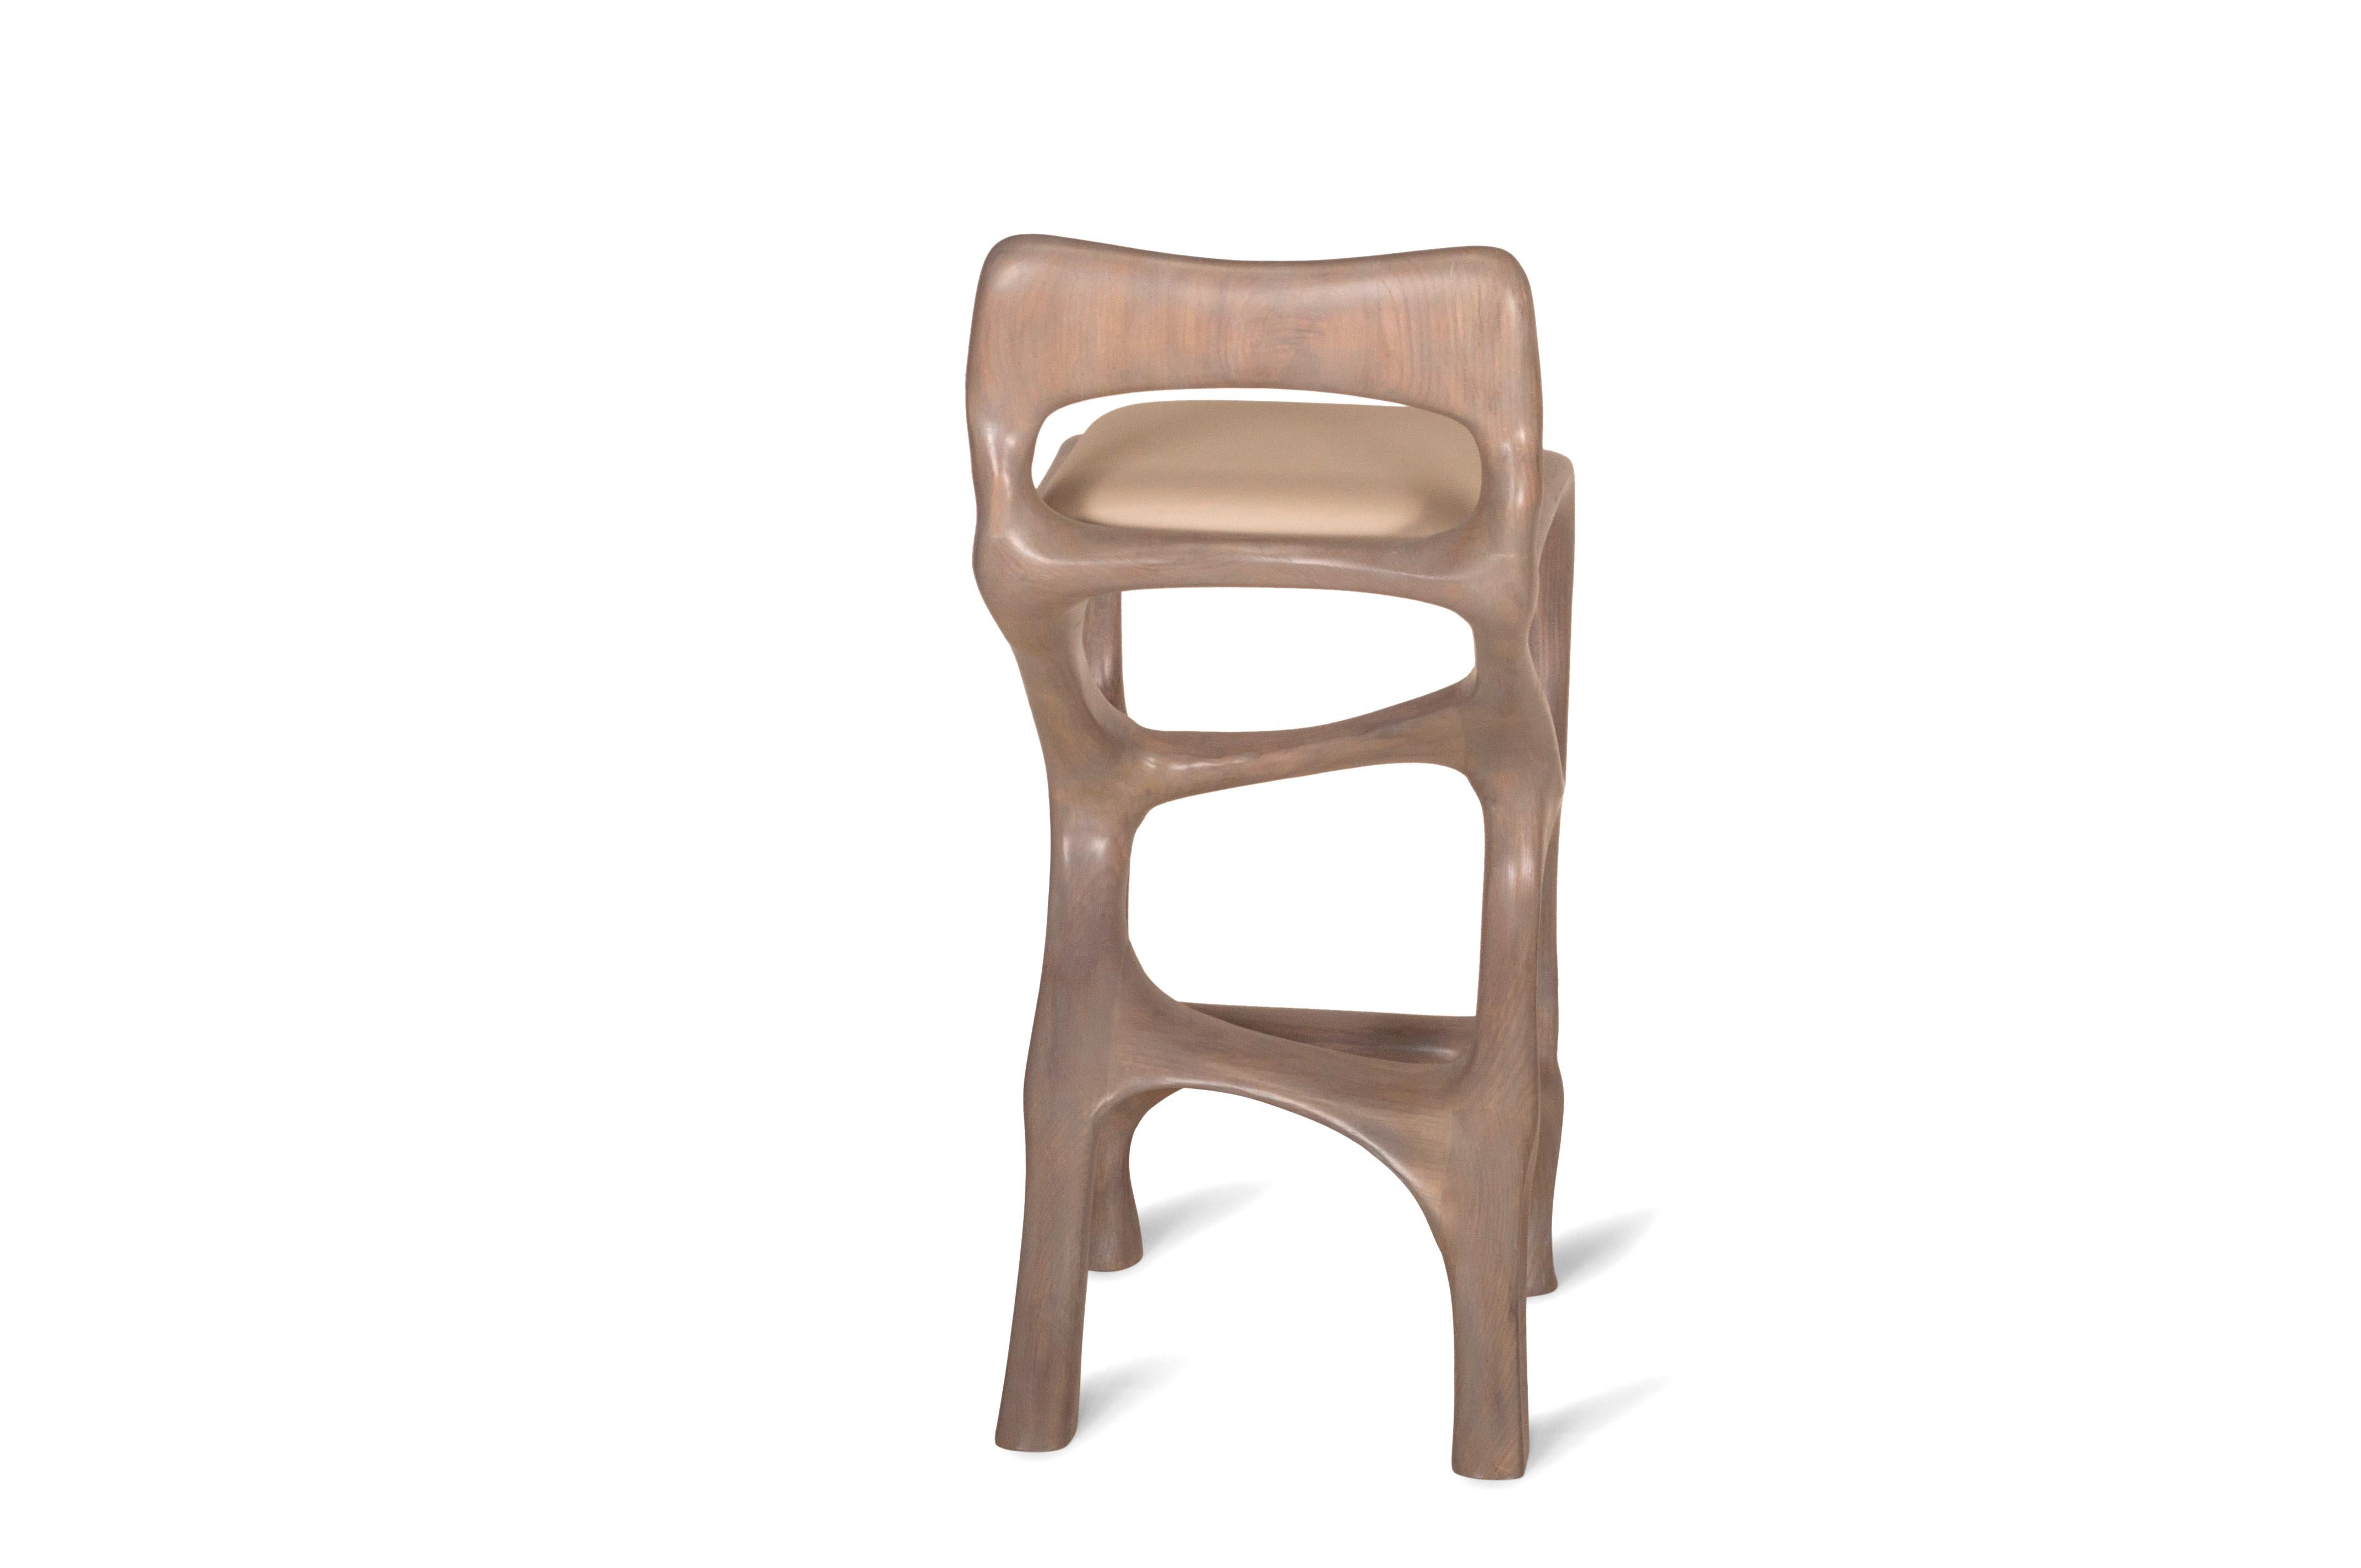 Organic Modern Amorph Chimera Bar Stool with Back in Gray Oak stain on Ash wood  For Sale